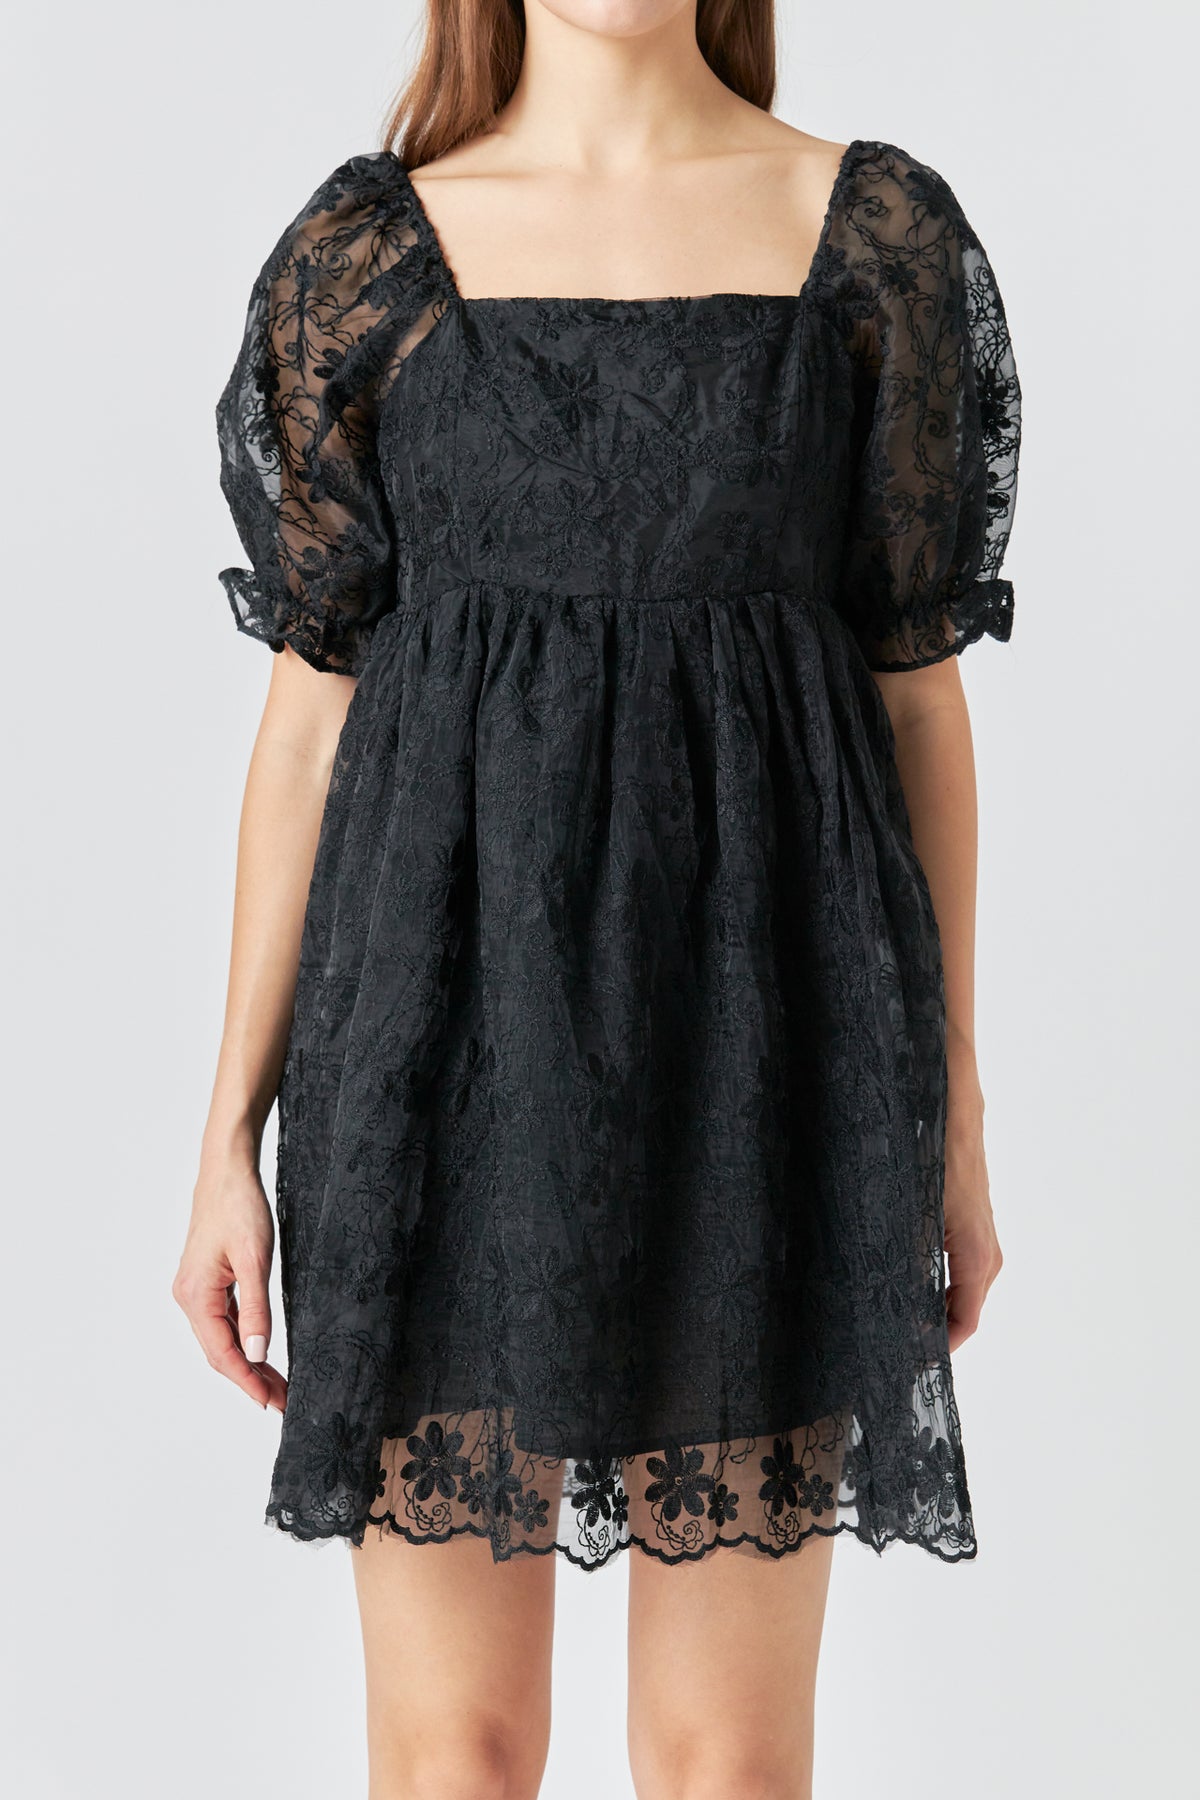 ENDLESS ROSE - Floral Embroidery Babydoll Dress - DRESSES available at Objectrare